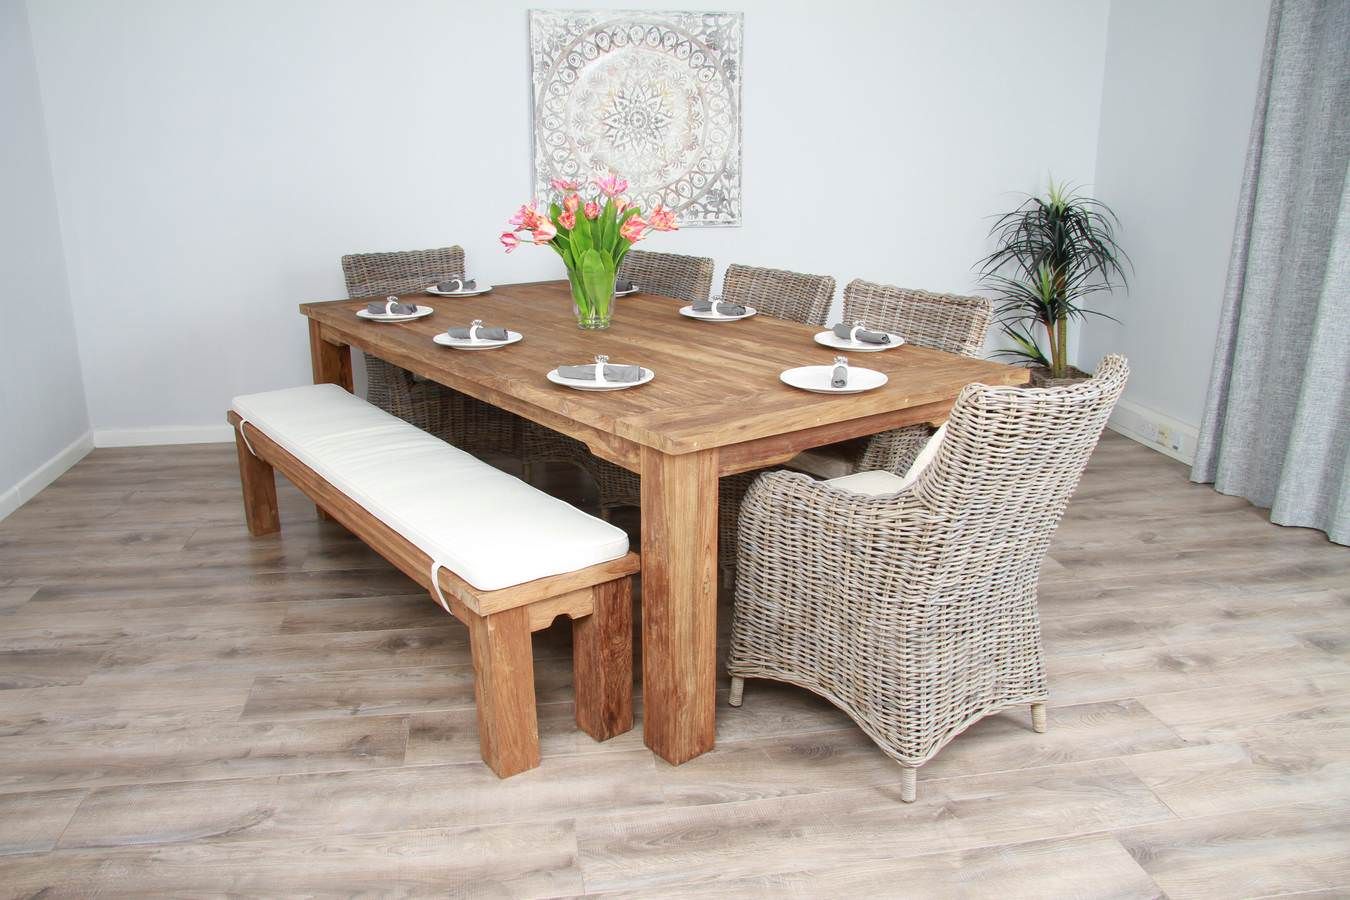 half pray Puno 2.4m Reclaimed Teak Taplock Dining Table with 5 Donna Chairs & 1 Backless  Bench - Sustainable Furniture